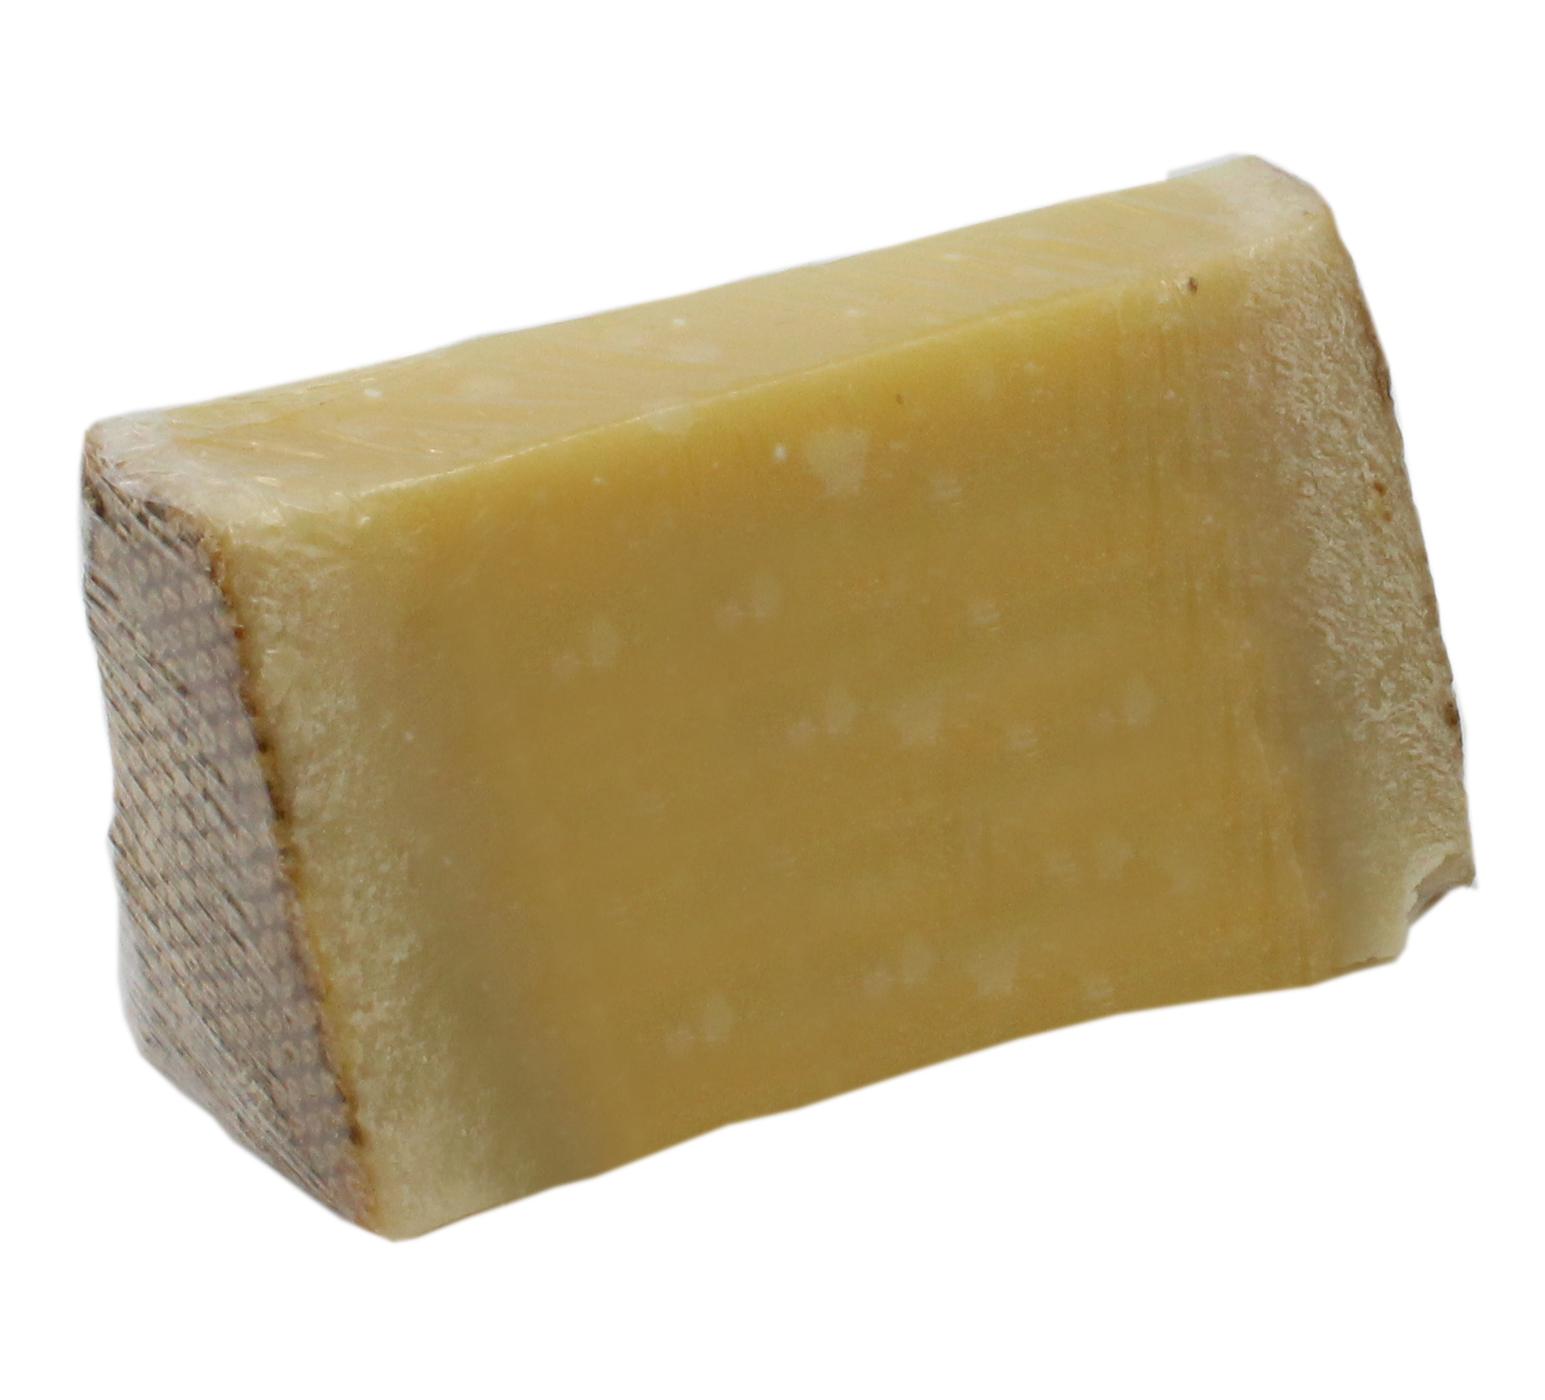 Fromage Gruyere S.A. Le Gruyère AOP 1655; image 1 of 2